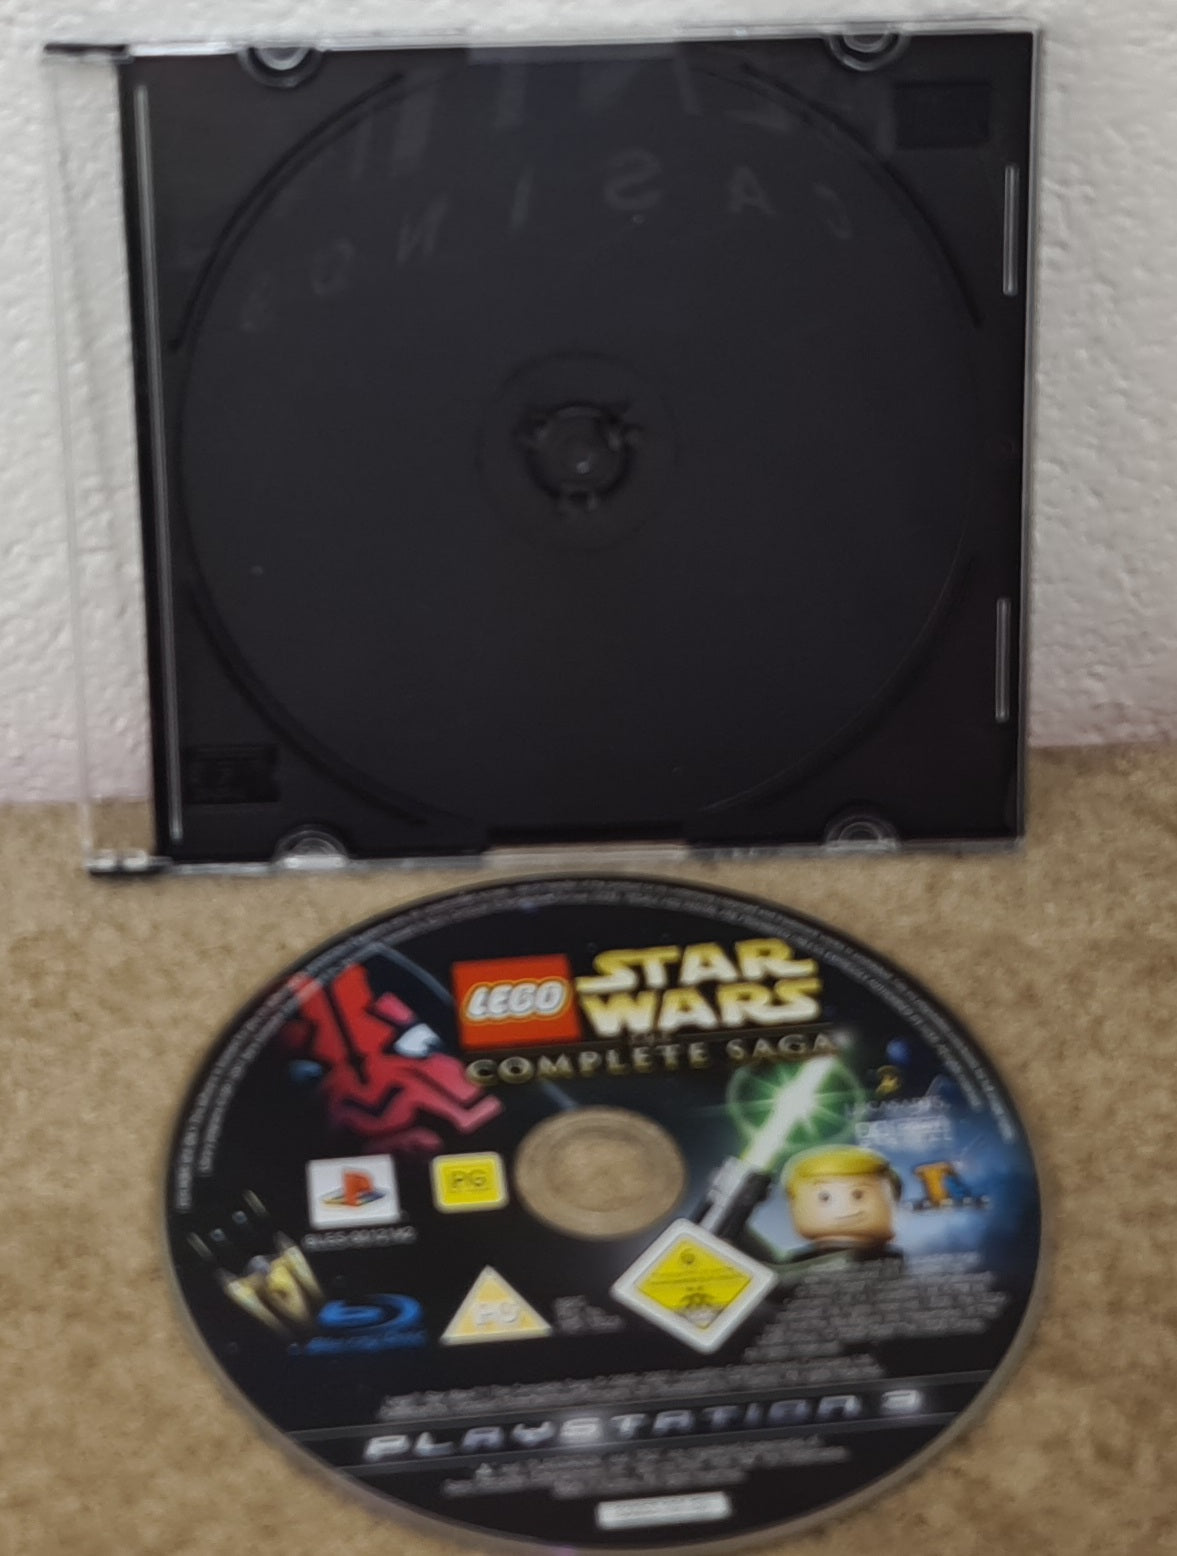 Lego Star Wars the Complete Saga Sony Playstation 3 (PS3) Game Disc Only